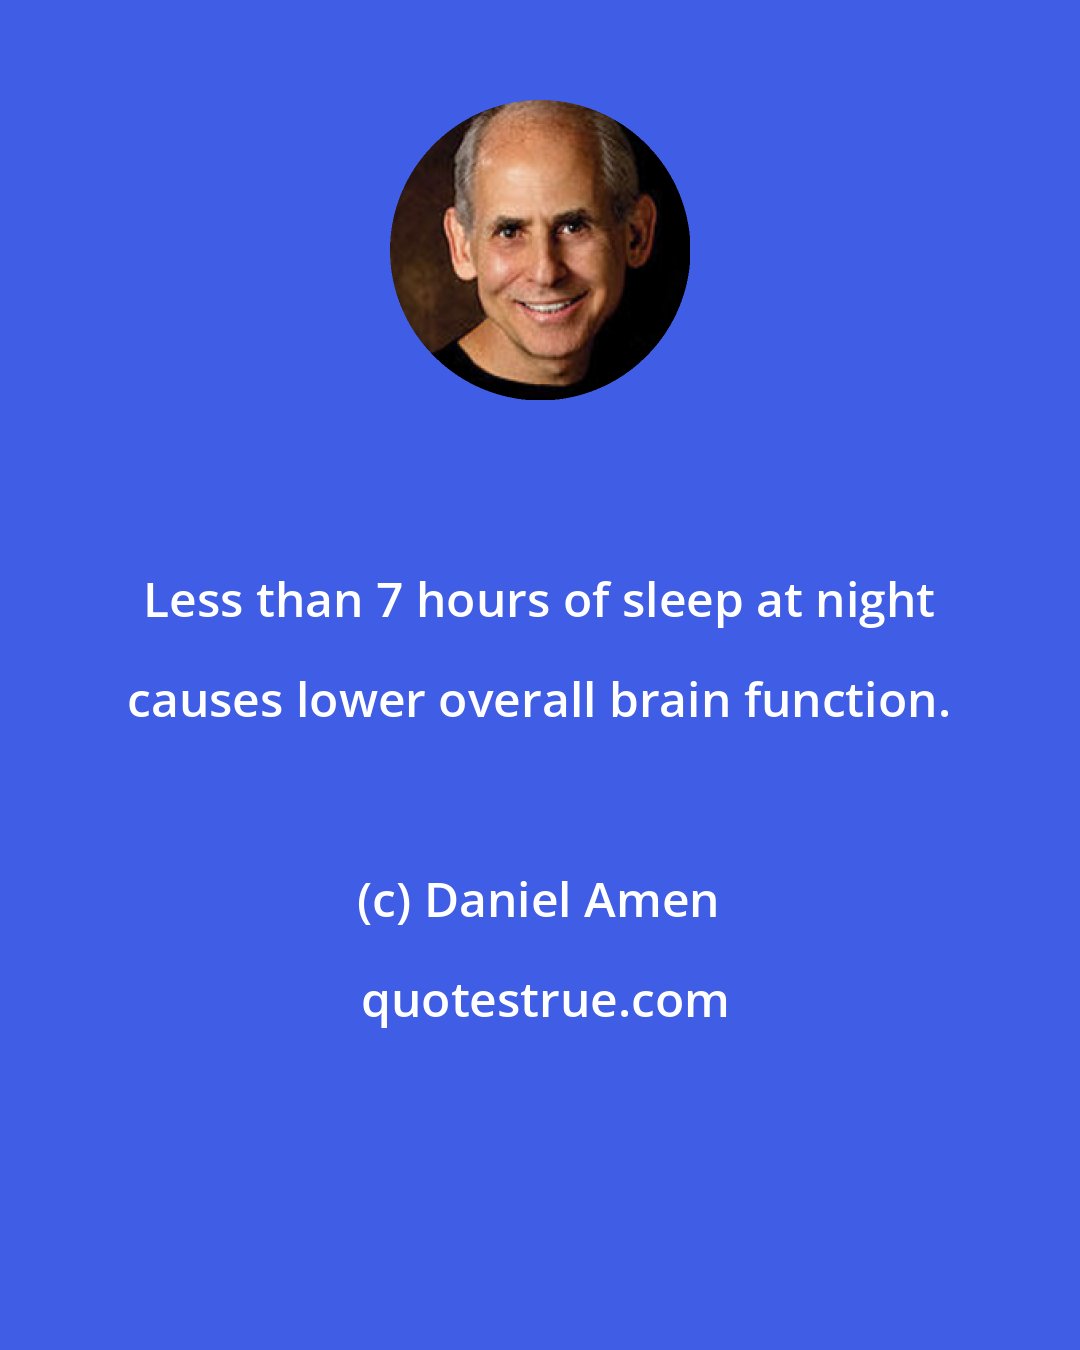 Daniel Amen: Less than 7 hours of sleep at night causes lower overall brain function.